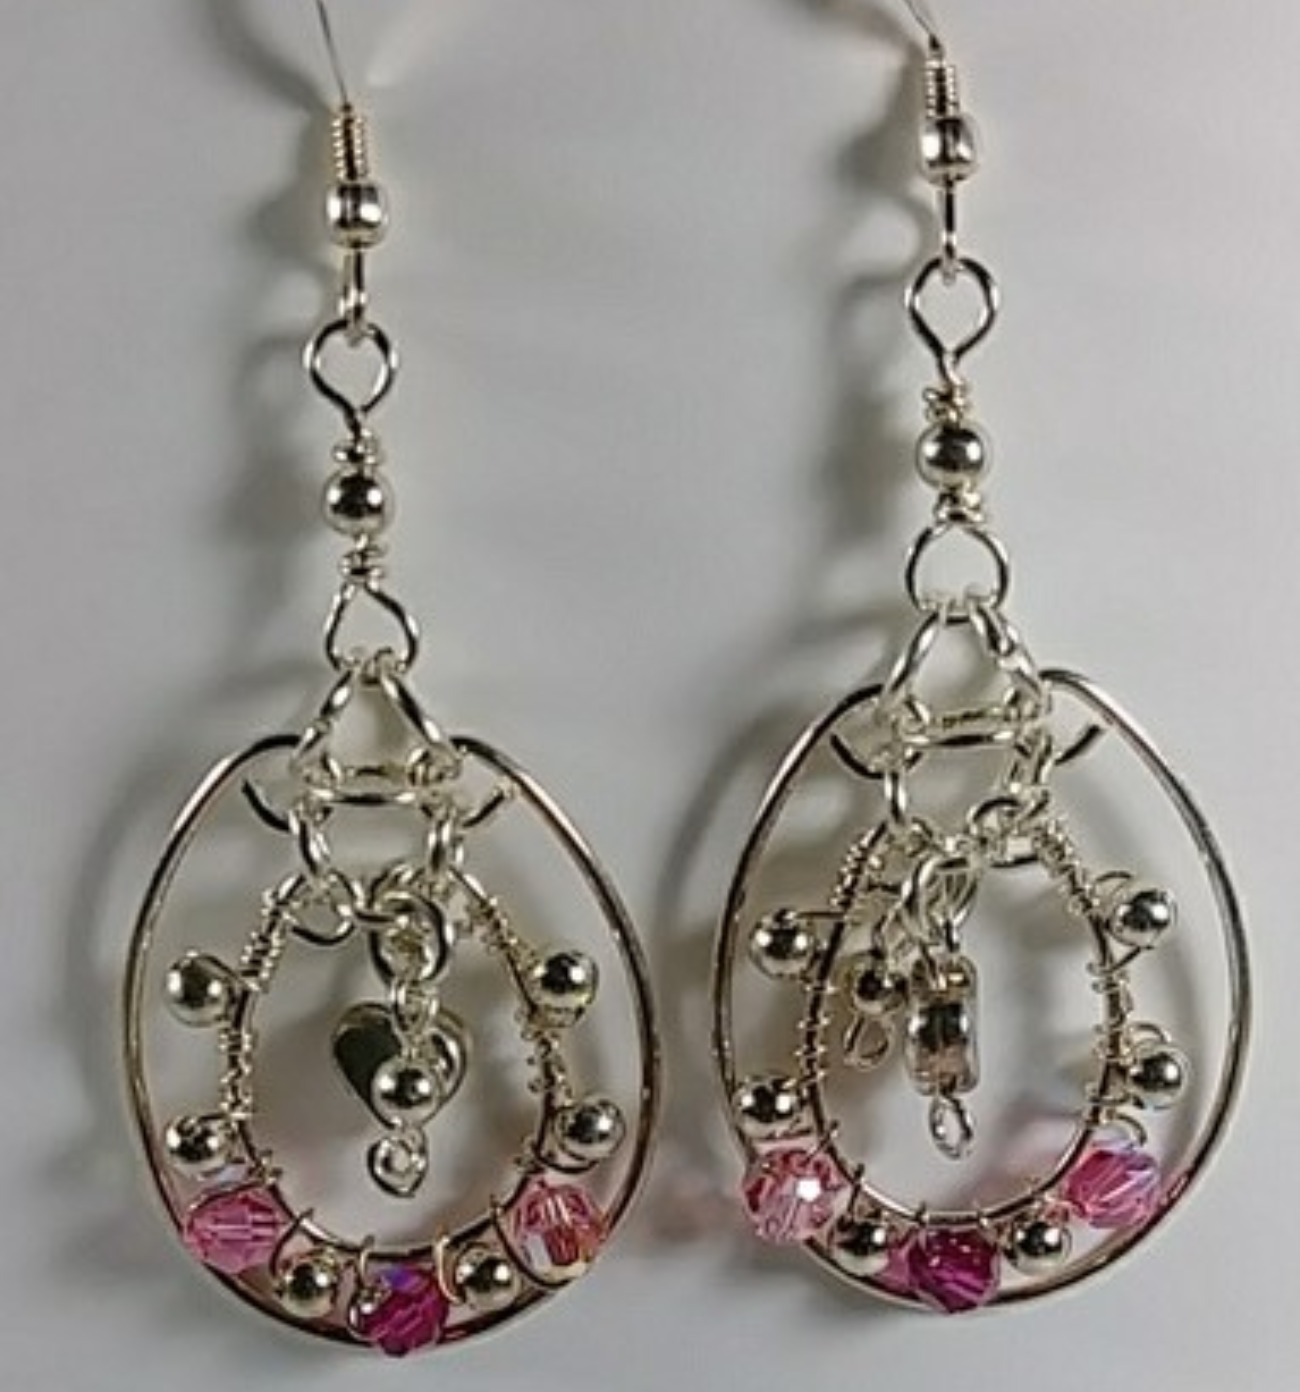 606 - EAR - Description: Earrings: Sterling Silver Earrings, Swarovski Crystal, Sterling Silver Round and Heart Beads.(Sterling Silver Earwire)  Dimension: 2 1/2 ' L (Inches)